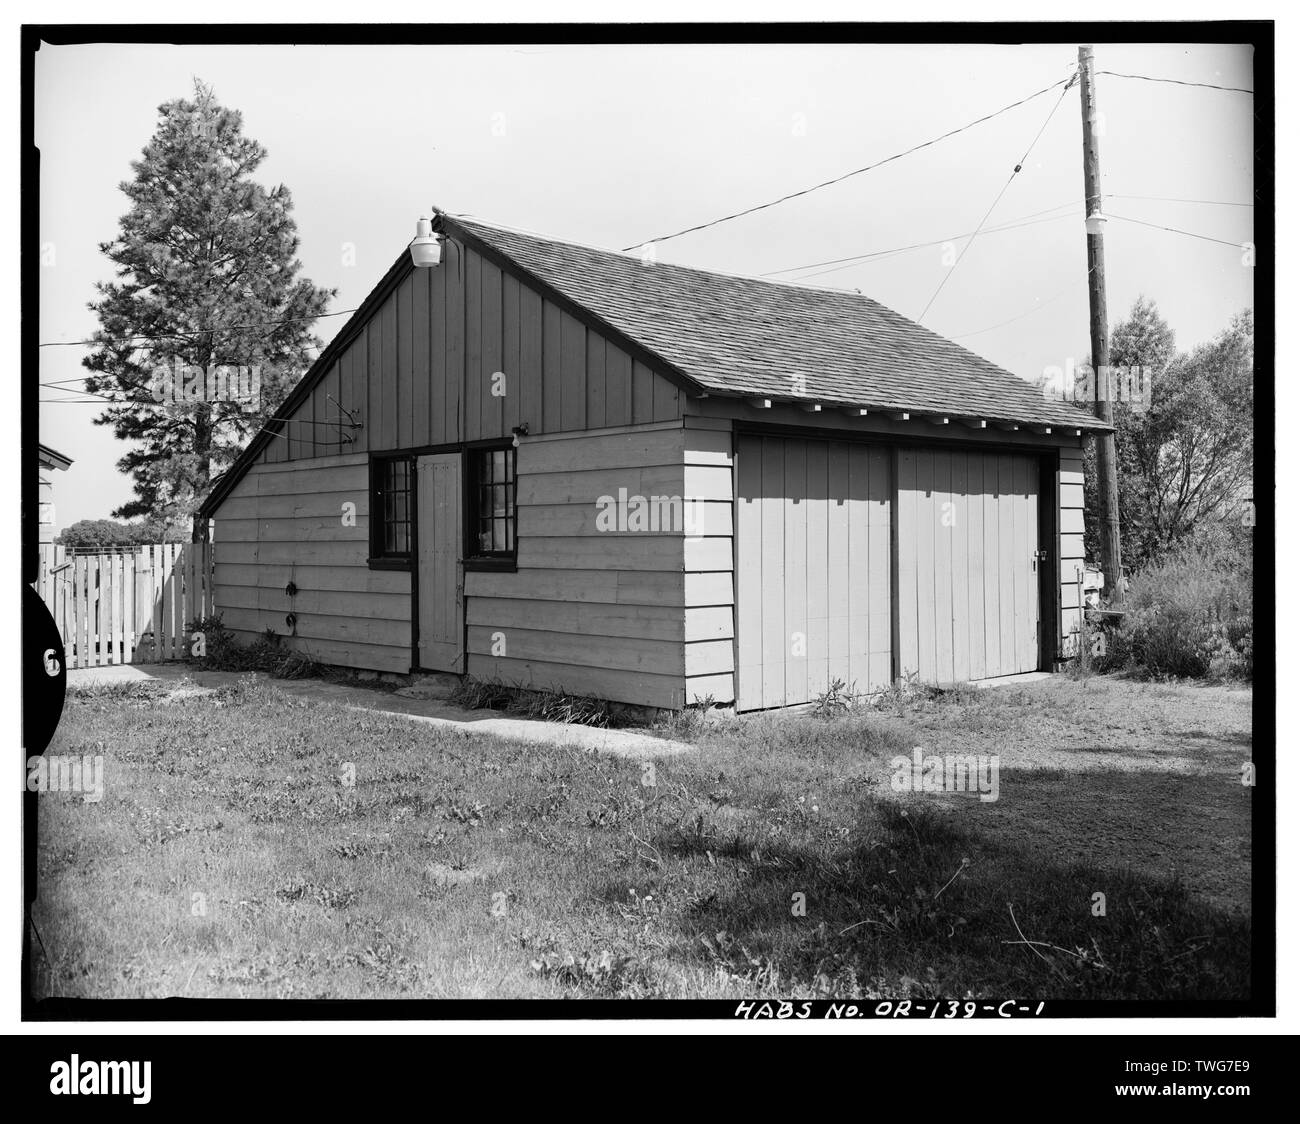 RANGERS RESIDENCE, GARAGE, SOUTHEAST FRONT AND SOUTHWEST SIDE, LOOKING NORTH - Union Ranger District Compound, Garage-Rangers Residence, Fronting State Highway 203, at West edge of Union, Union, Union County, OR Stock Photo